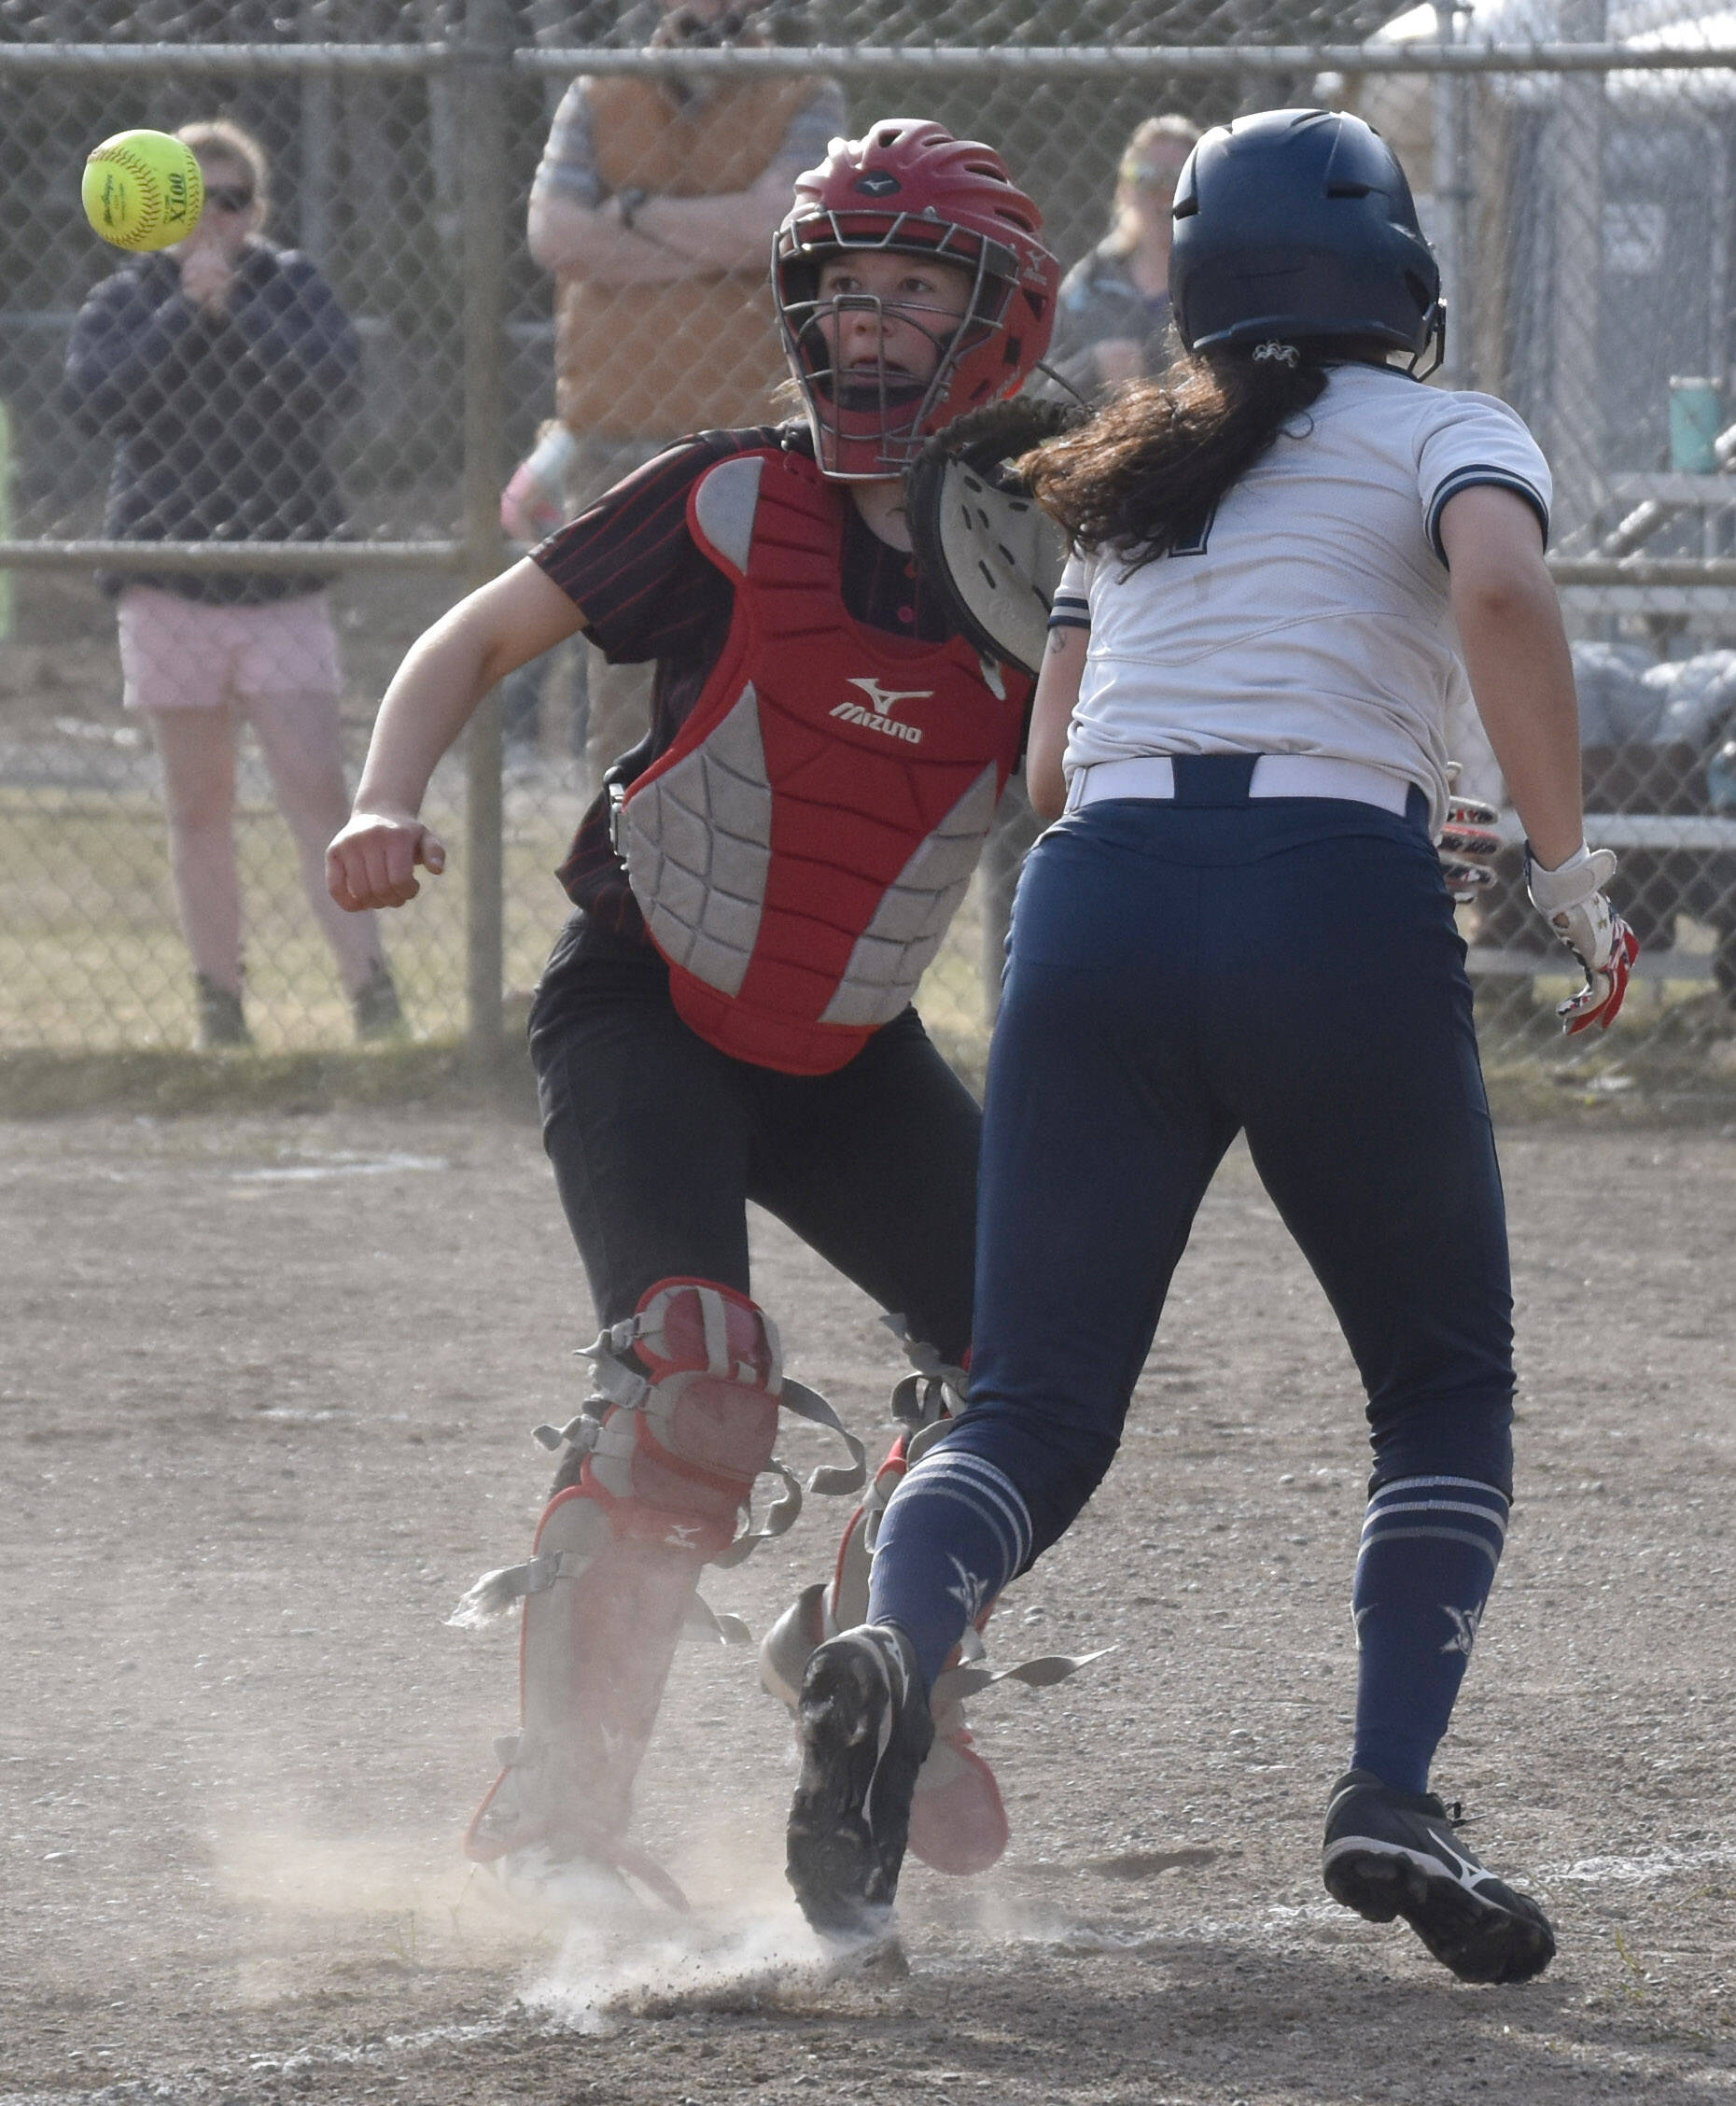 Kenai Central catcher Maggie Grenier gets ready to tag Soldotna’s Miah Mead to end a rundown Thursday, May 18, 2023, at the Soldotna Little League fields in Soldotna, Alaska. (Photo by Jeff Helminiak/Peninsula Clarion)